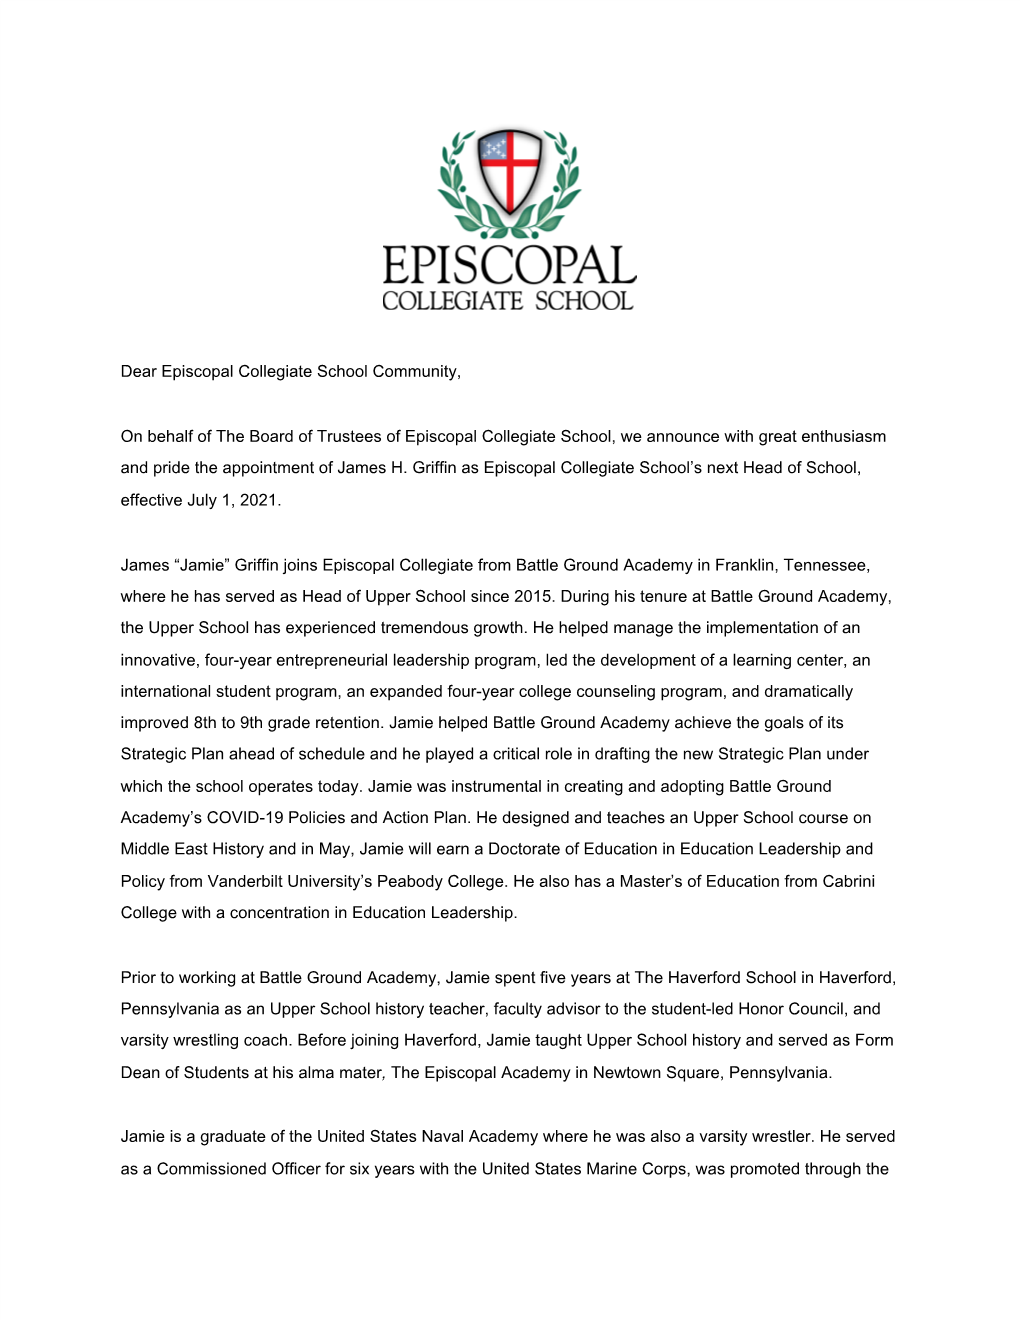 A Letter from the President of the Board of Trustees